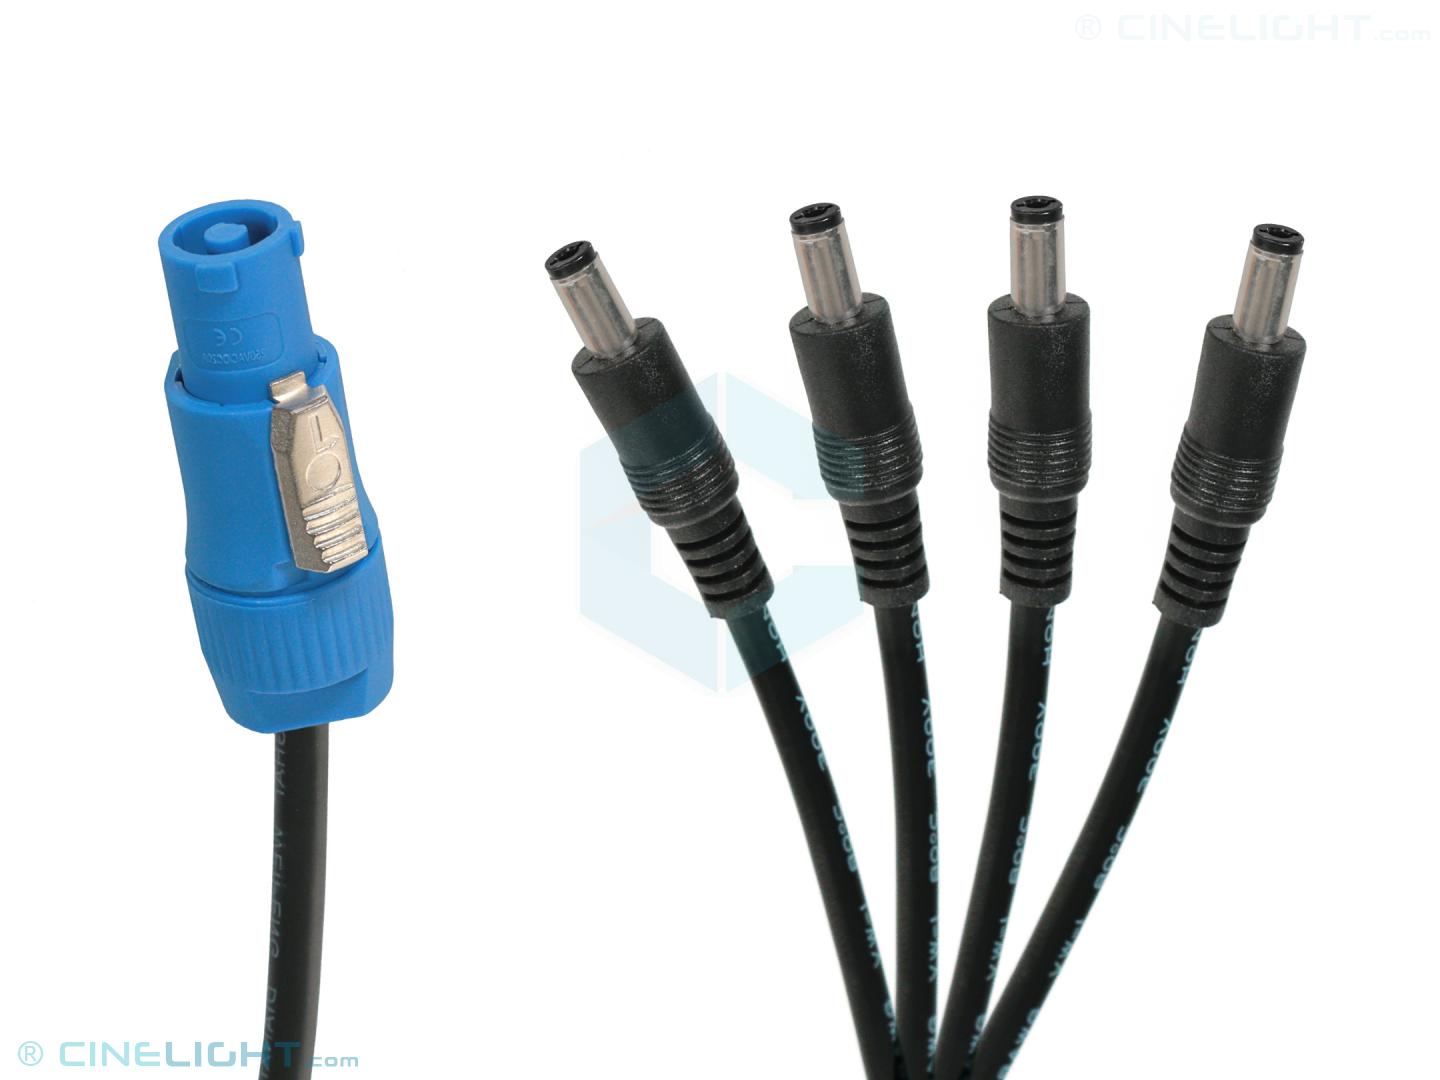 1-4 Power Cable CineTUBE